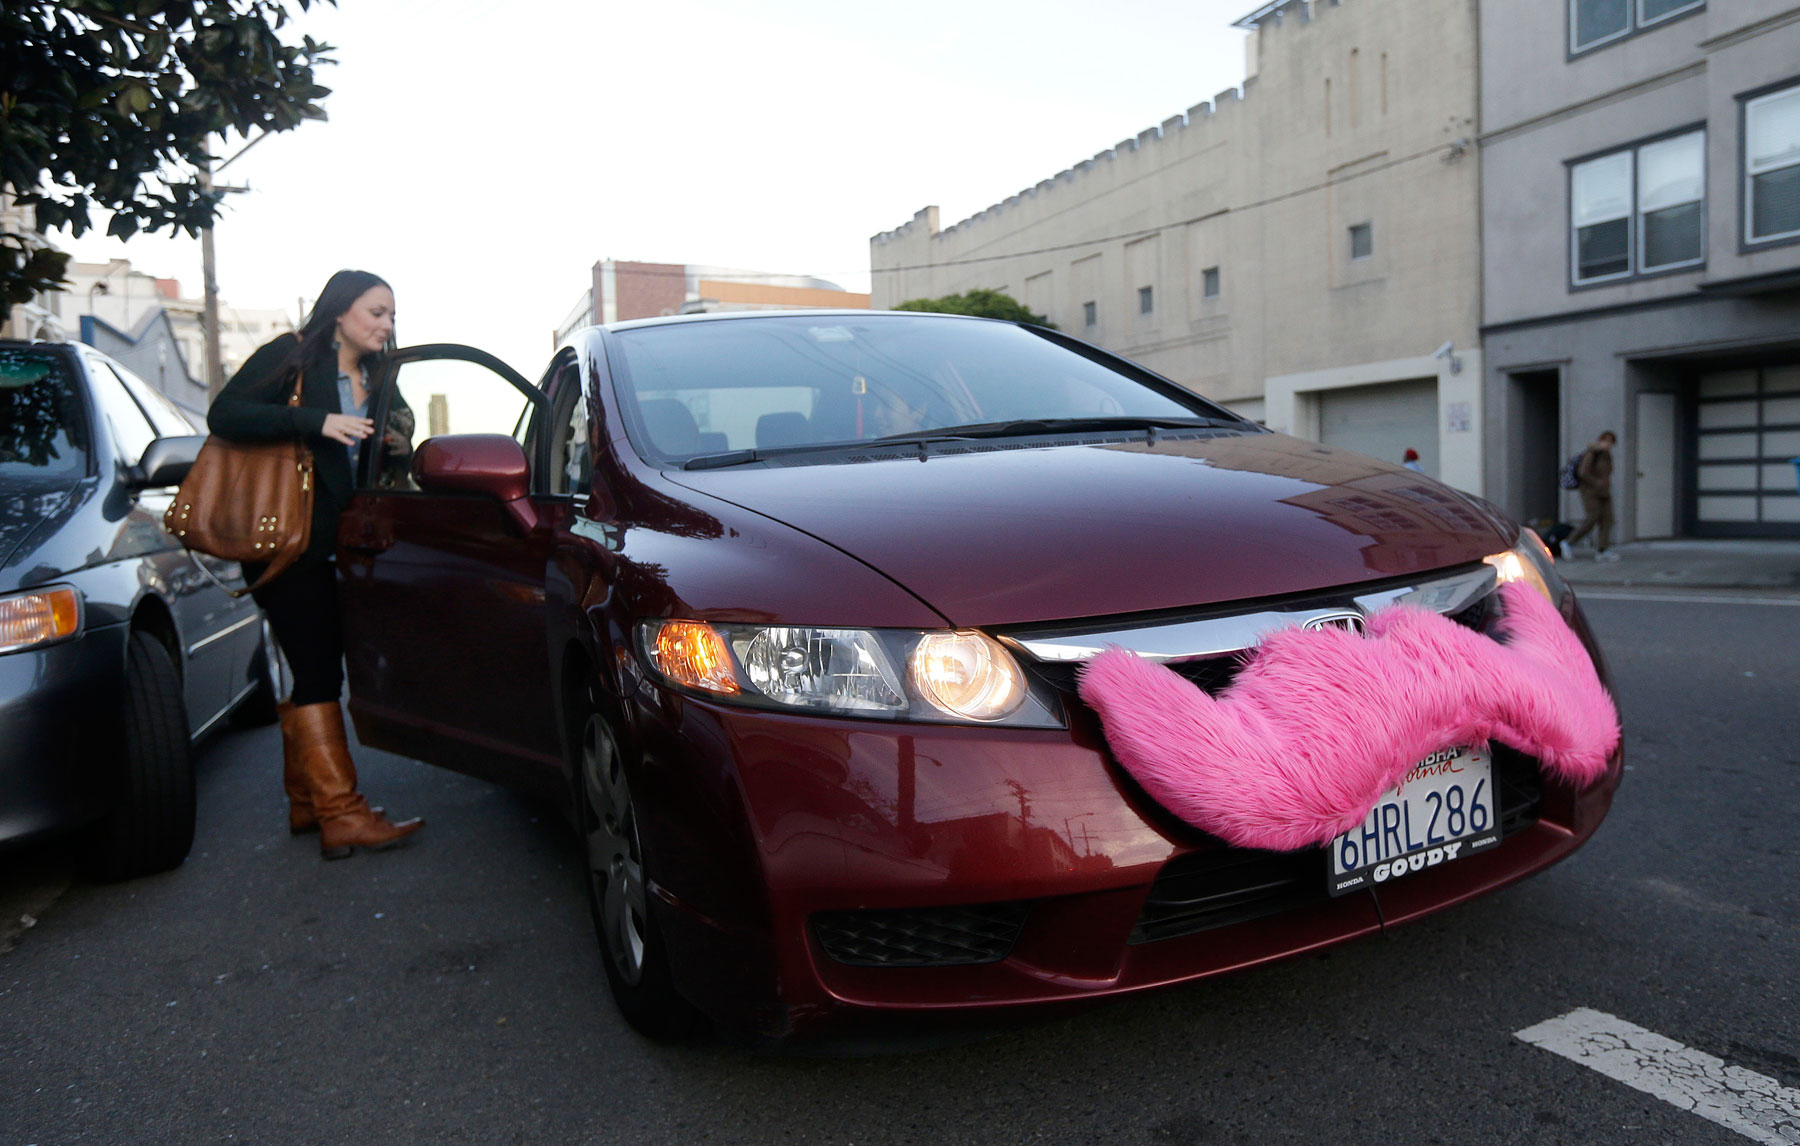 Taxi, limo companies say Uber, Lyft break the rules